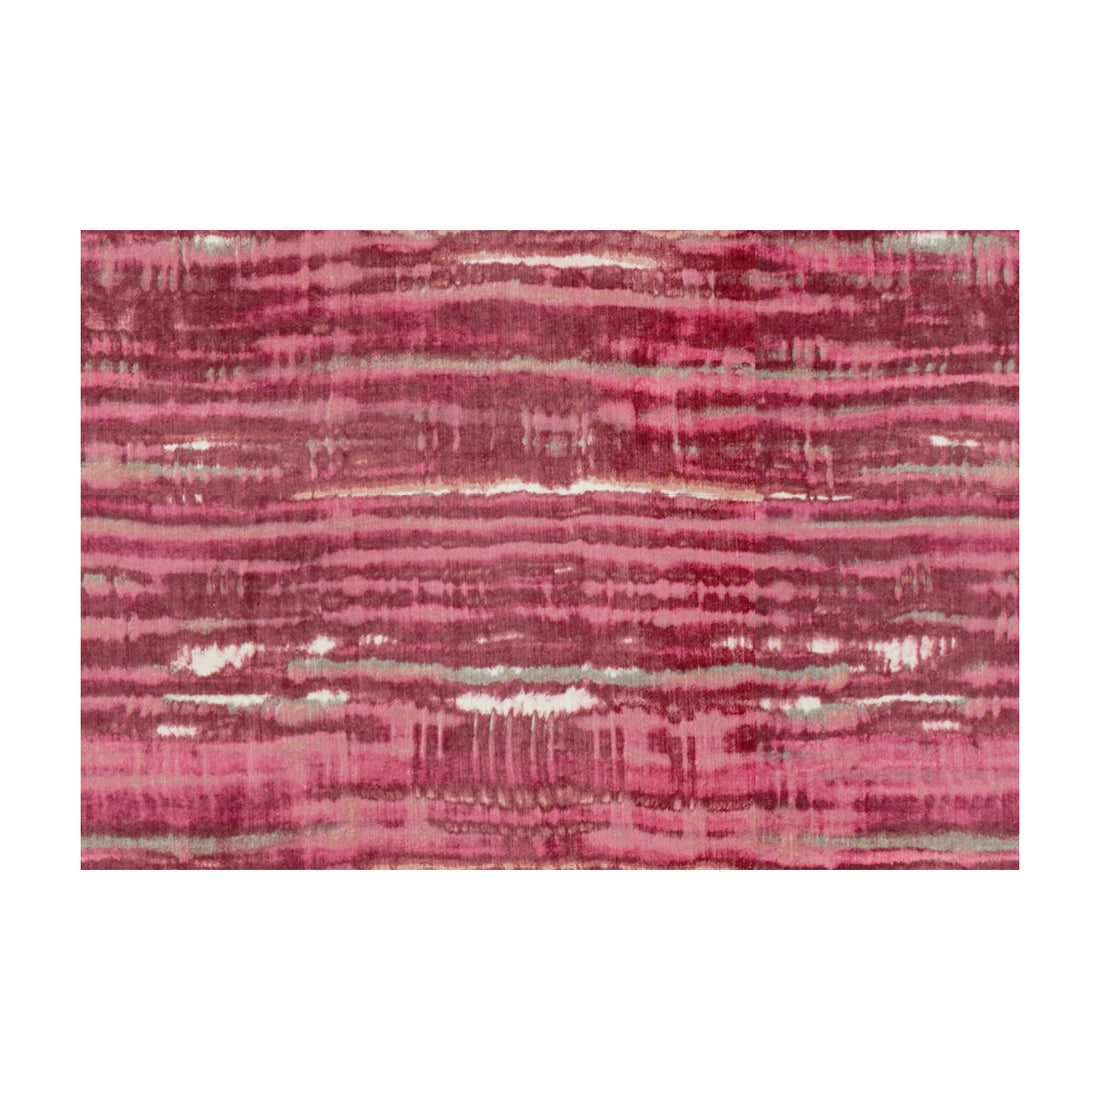 Chicattah fabric in rose quartz color - pattern CHICATTAH.917.0 - by Kravet Couture in the Linherr Hollingsworth Boheme collection